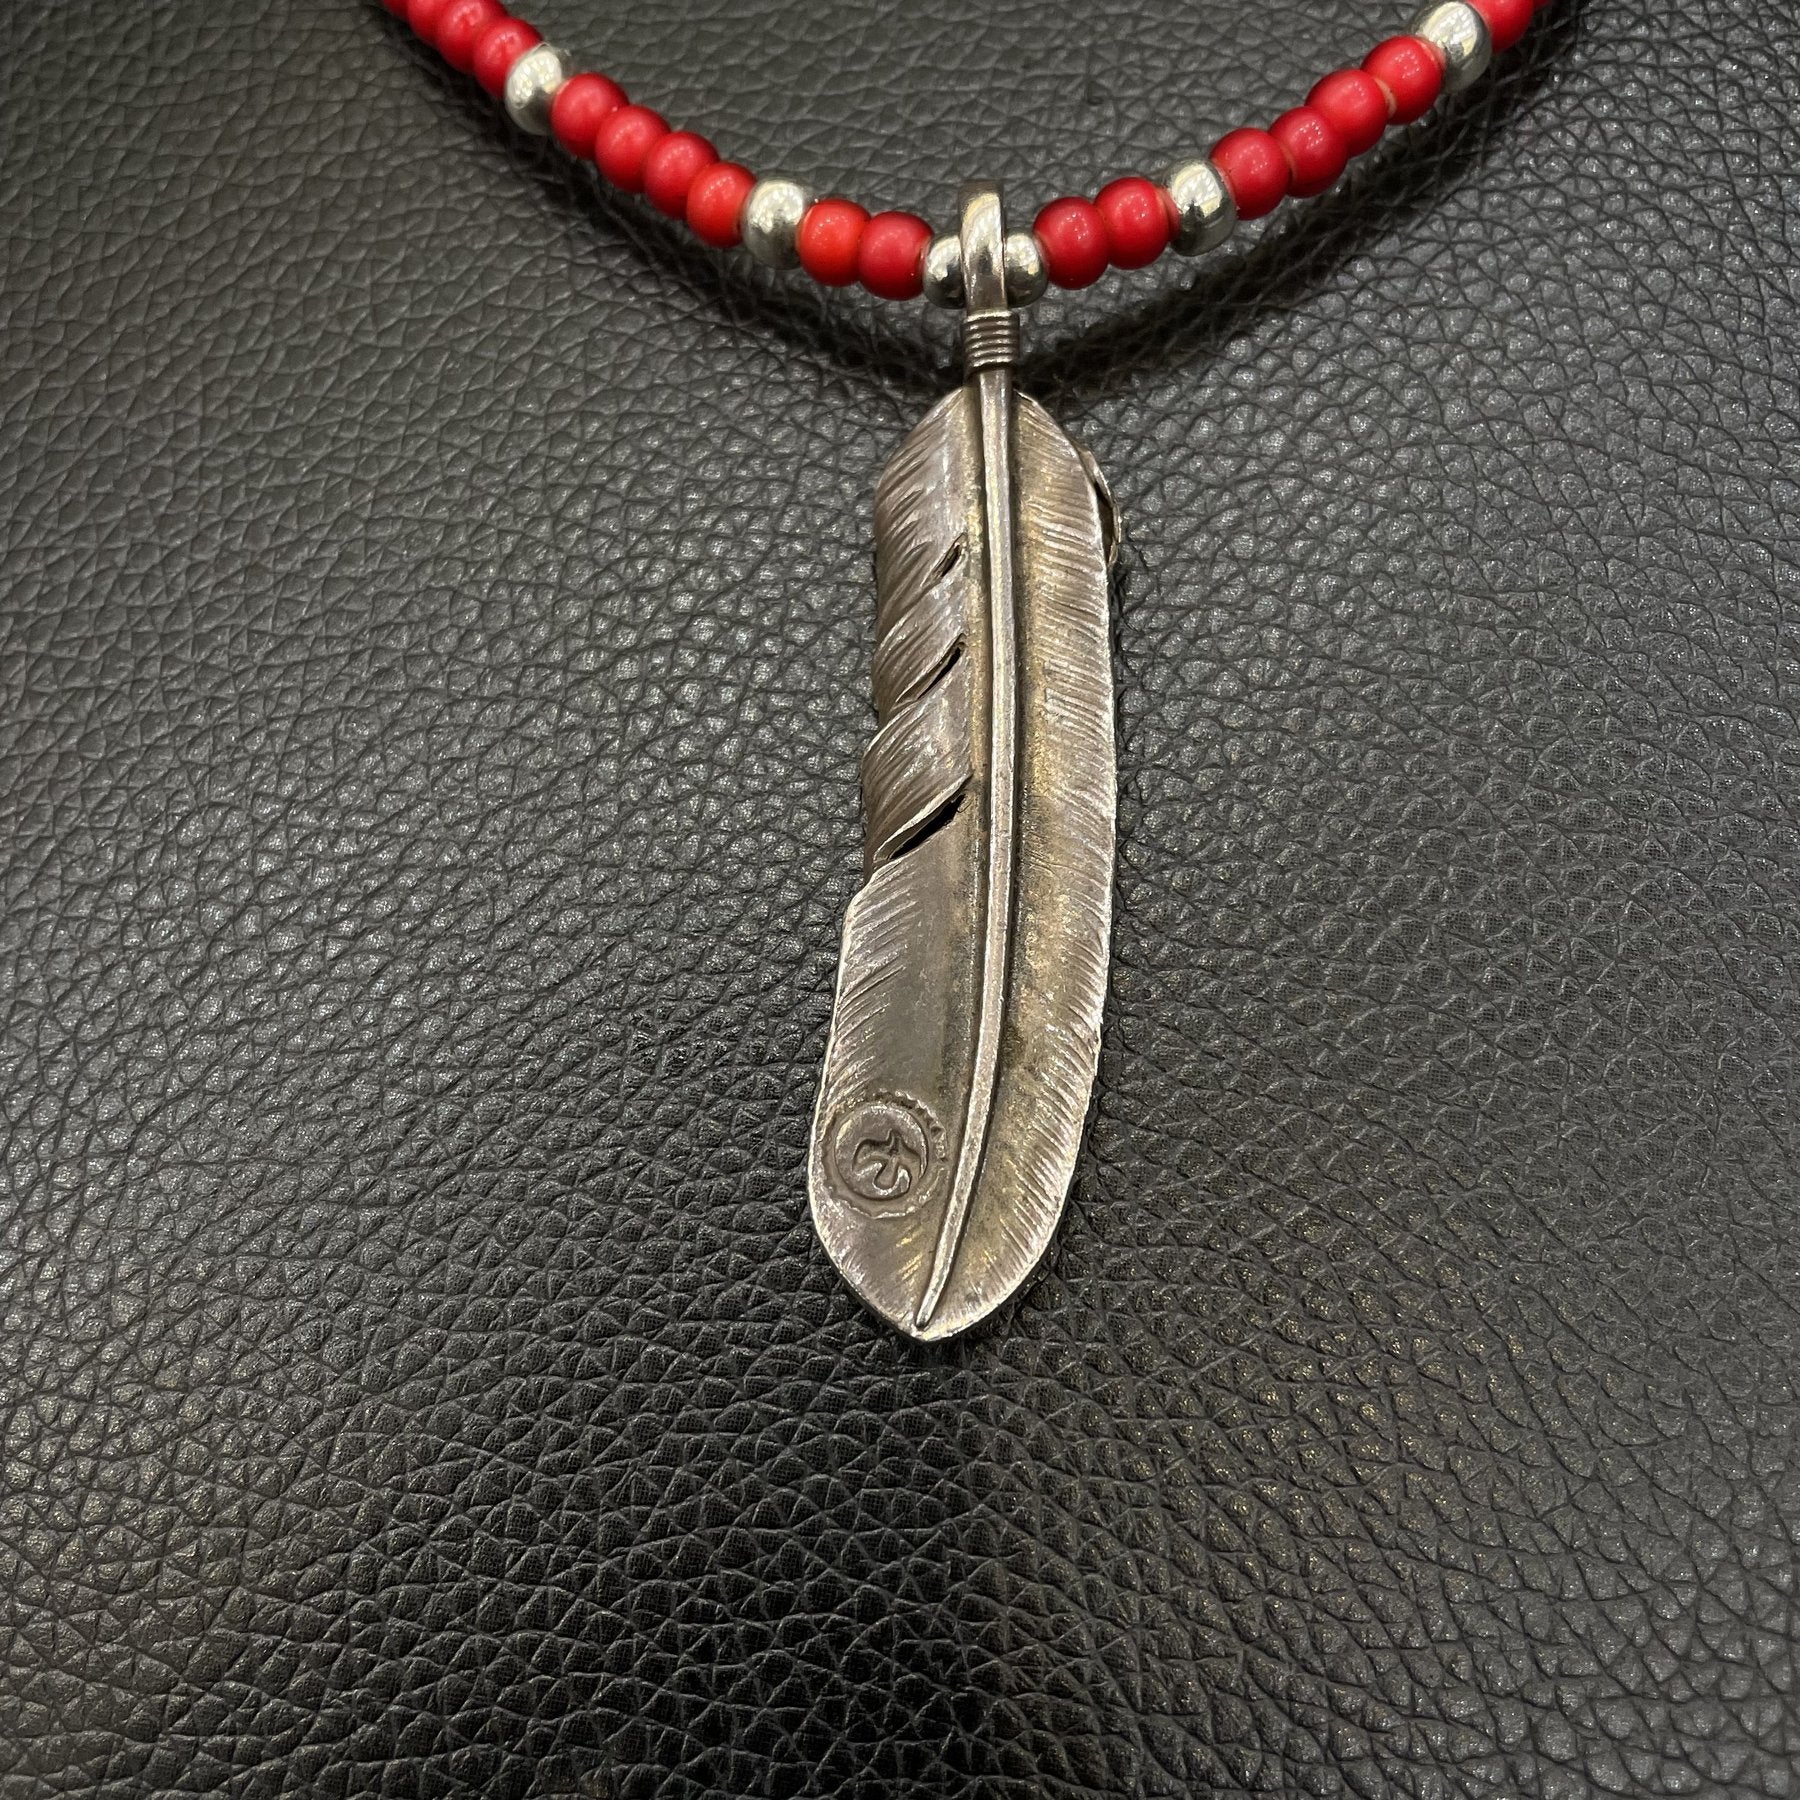 Goros Silver Top Feather (Left) (Xl) &amp; Antique Red Beads Setup